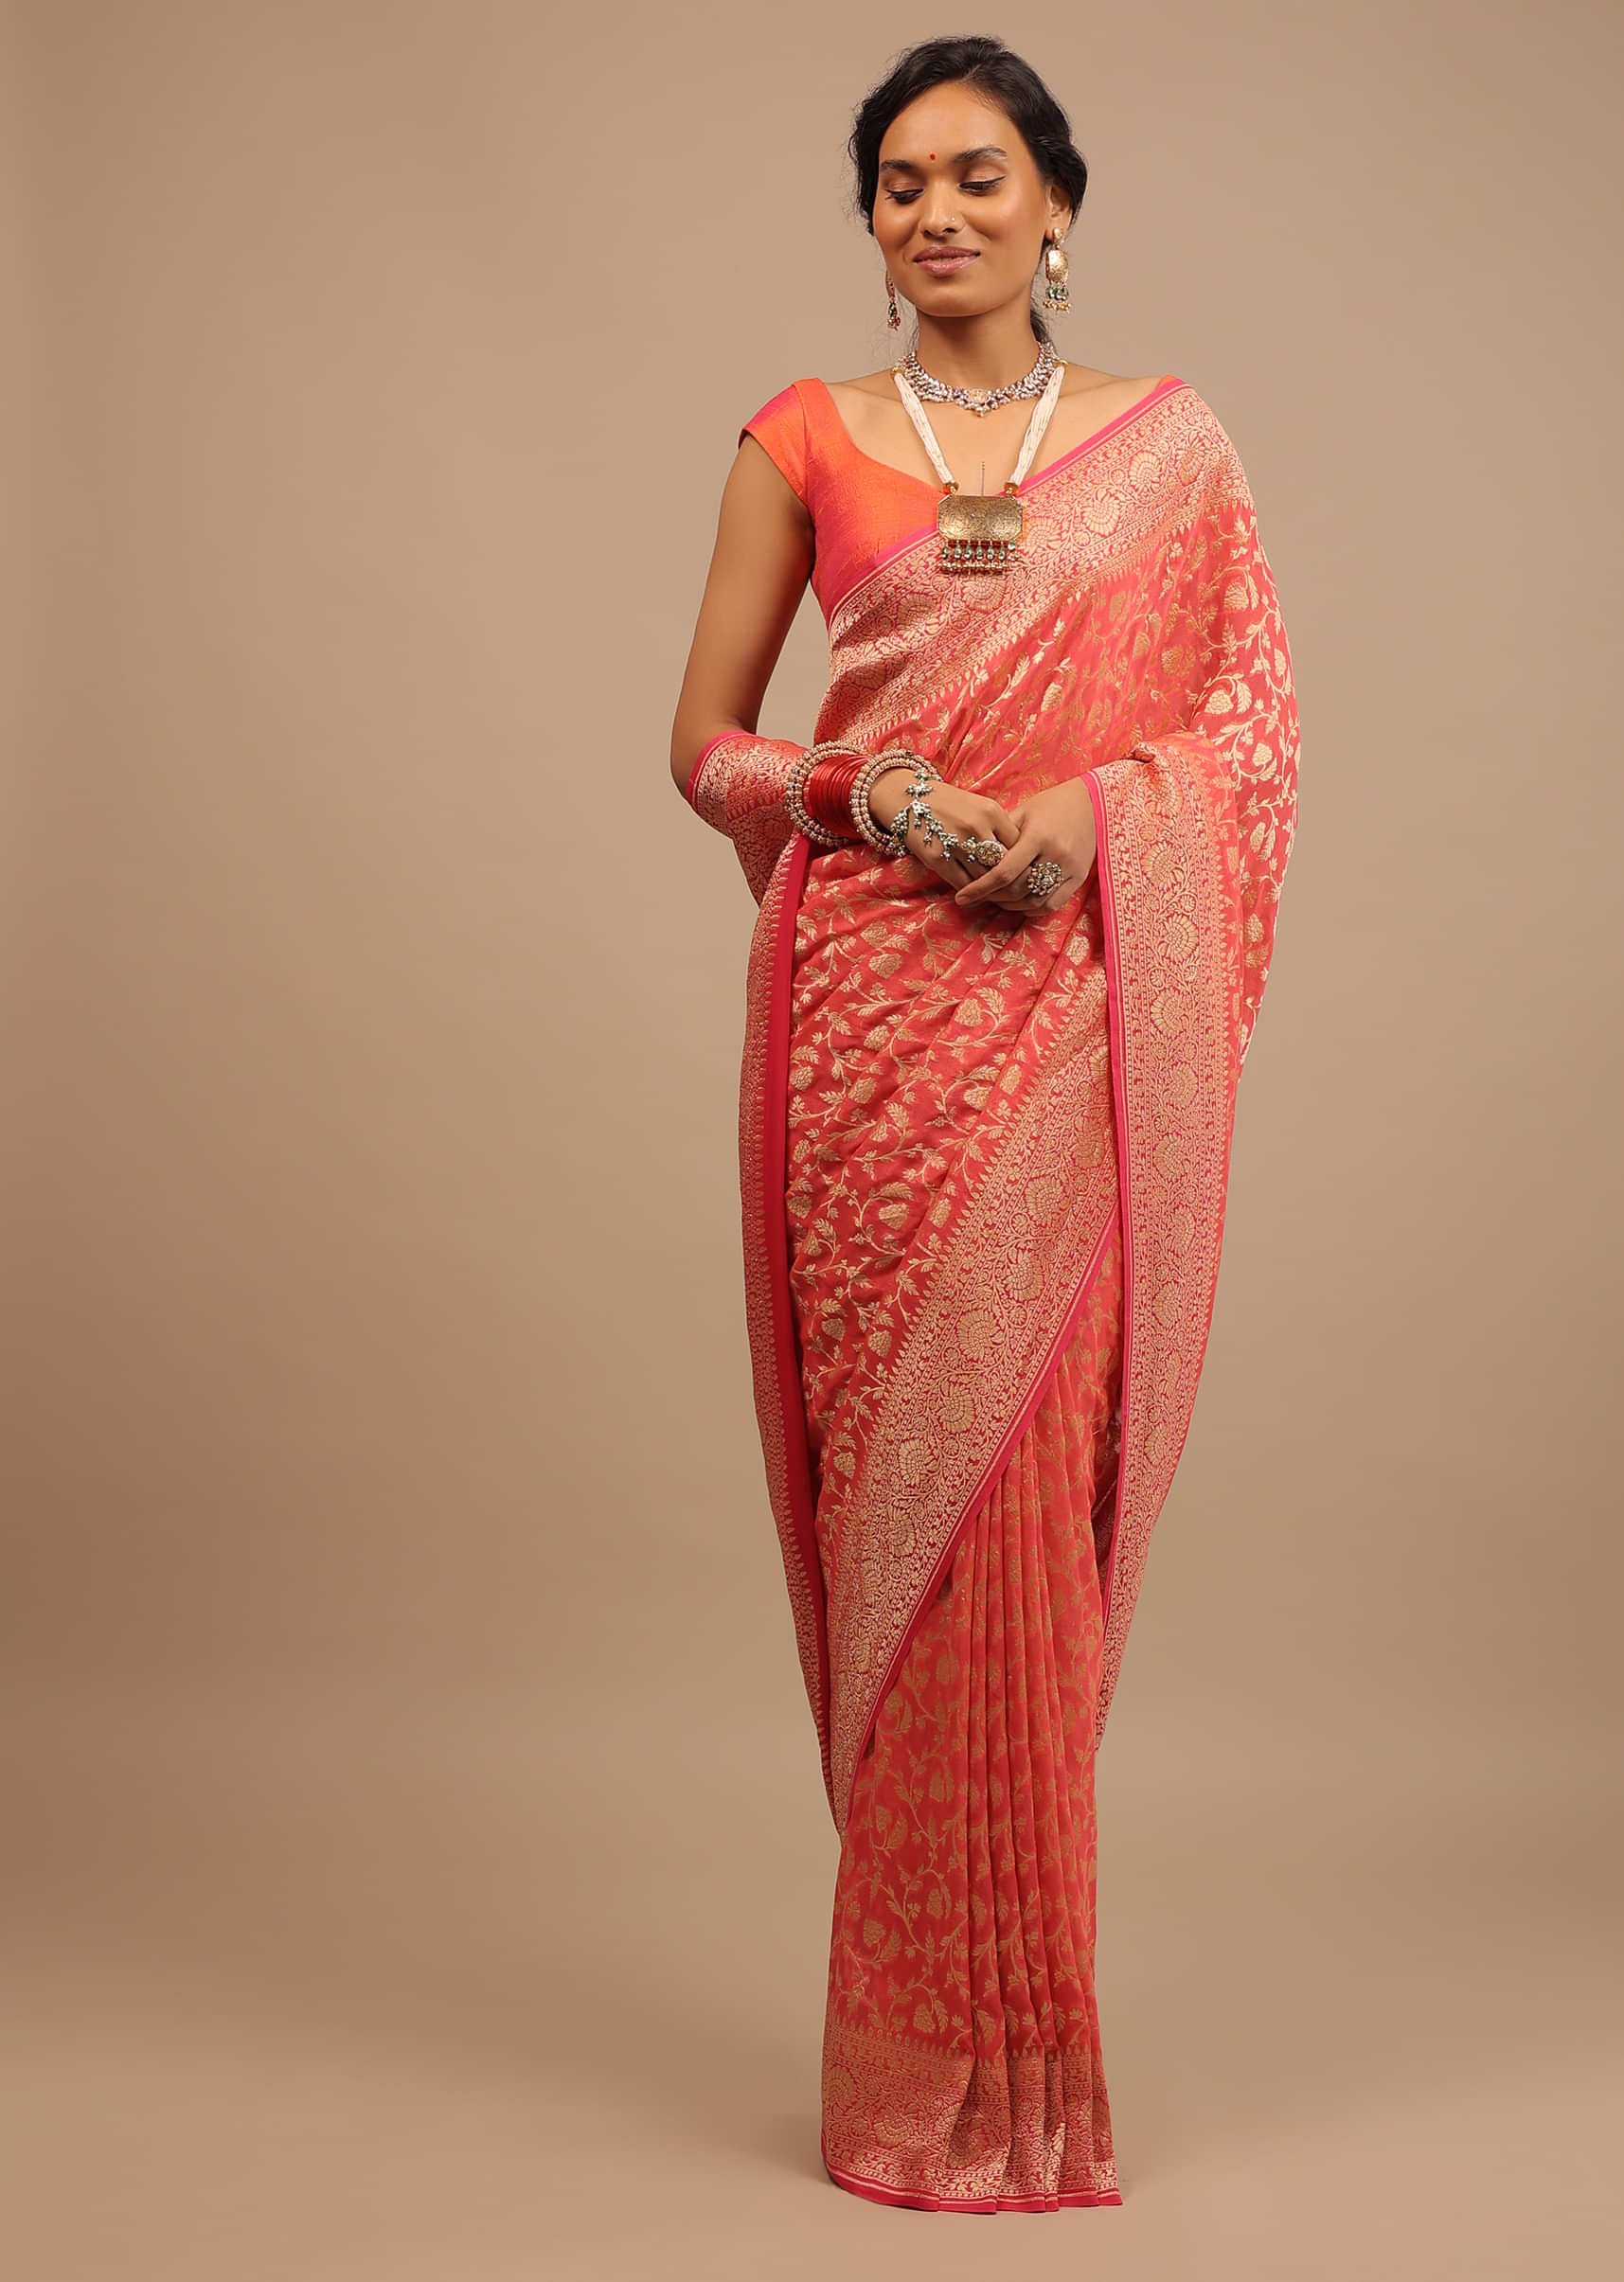 Fiesta Peach Saree In Georgette With Woven Jaal Work